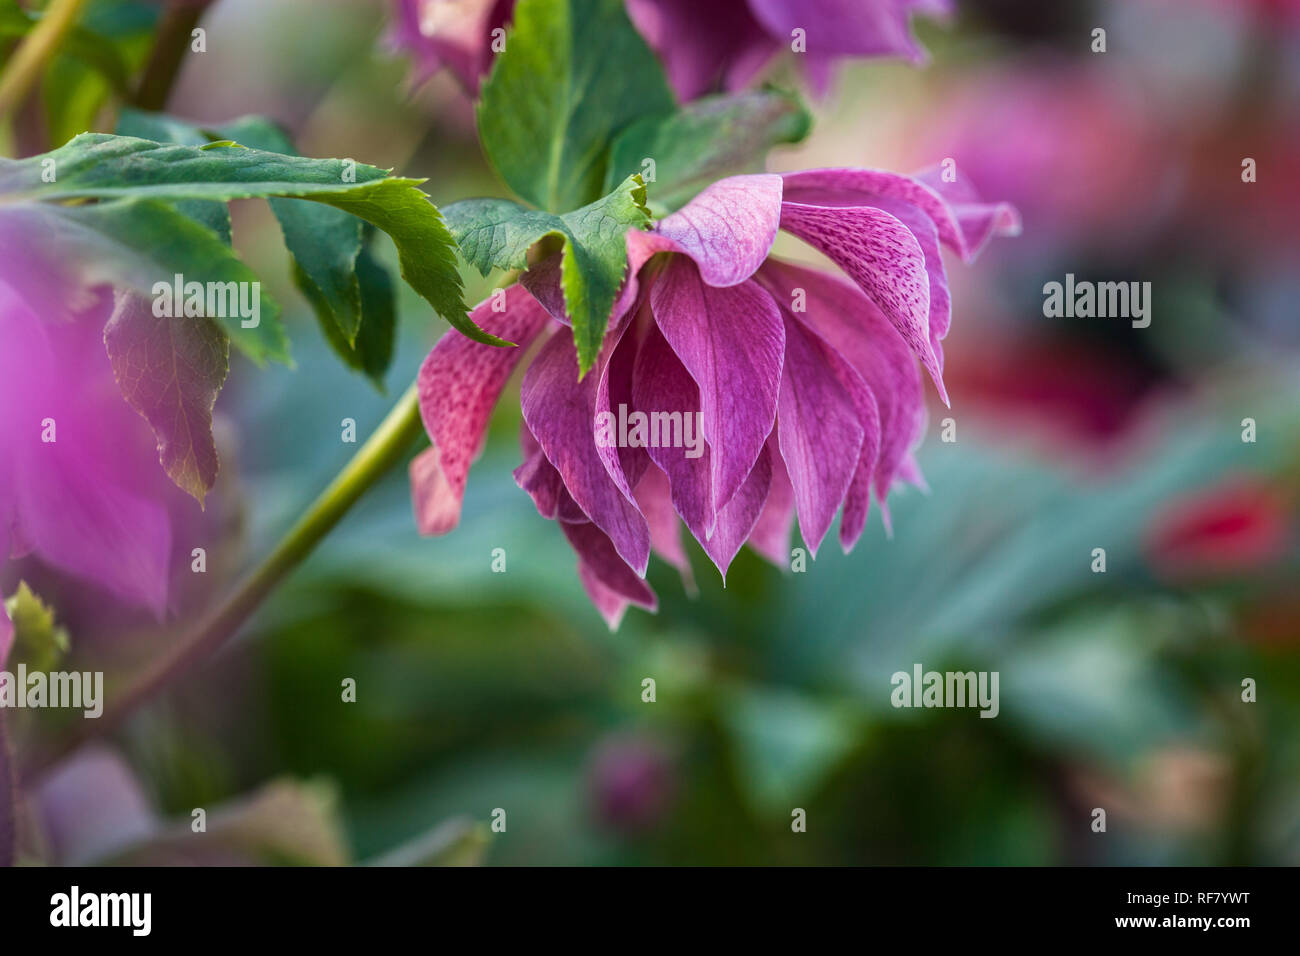 Close-up photo of beautiful purple pink with burgundy veins double flowers of lenten rose Elly (Helleborus orientalis) flowering during winter Stock Photo